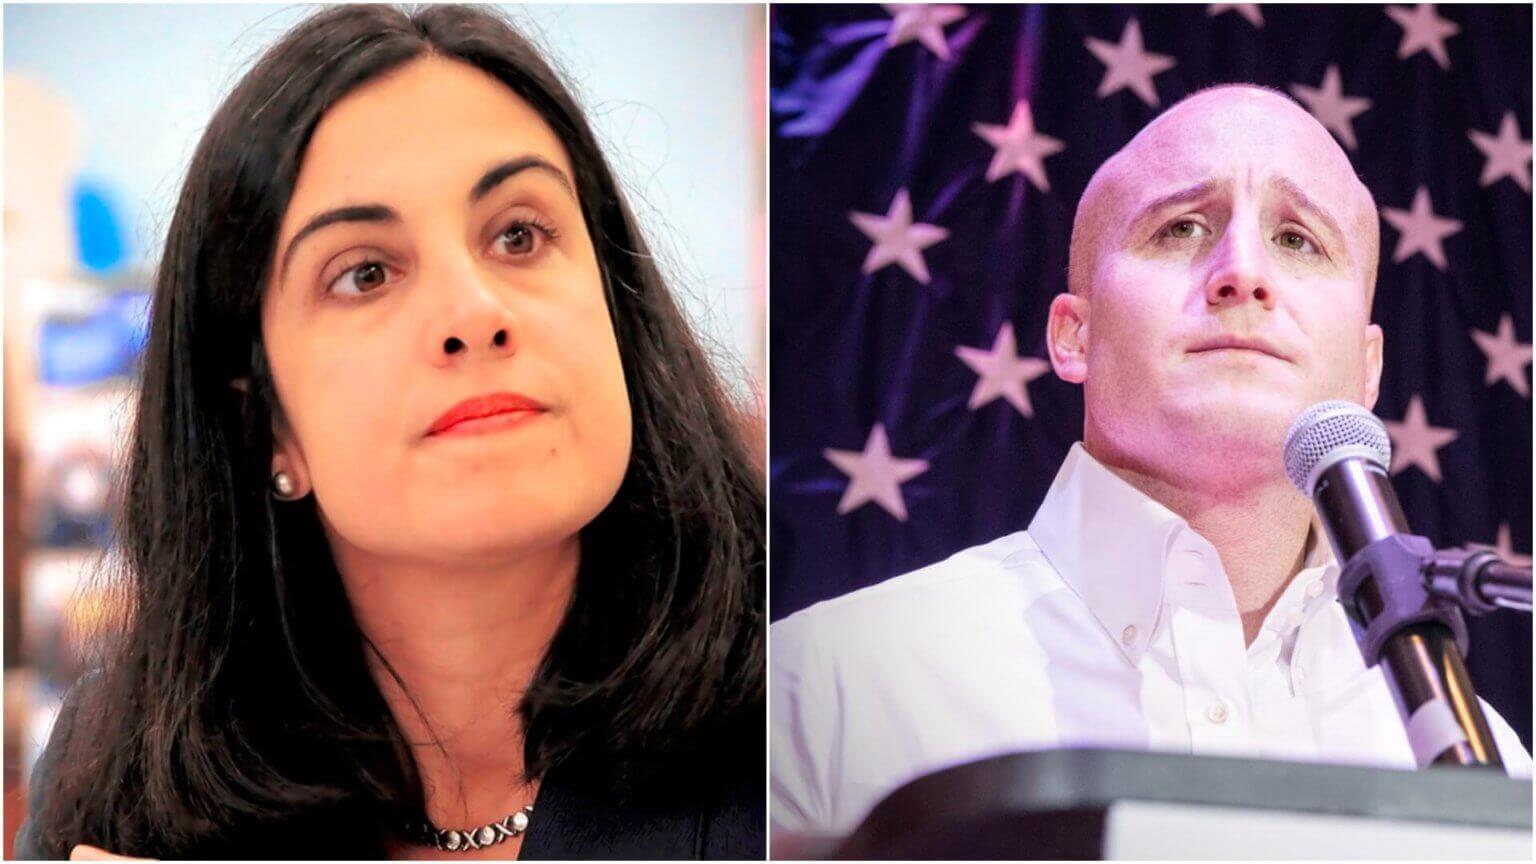 Rose challenges Malliotakis to no lying election contest  Brooklyn Paper